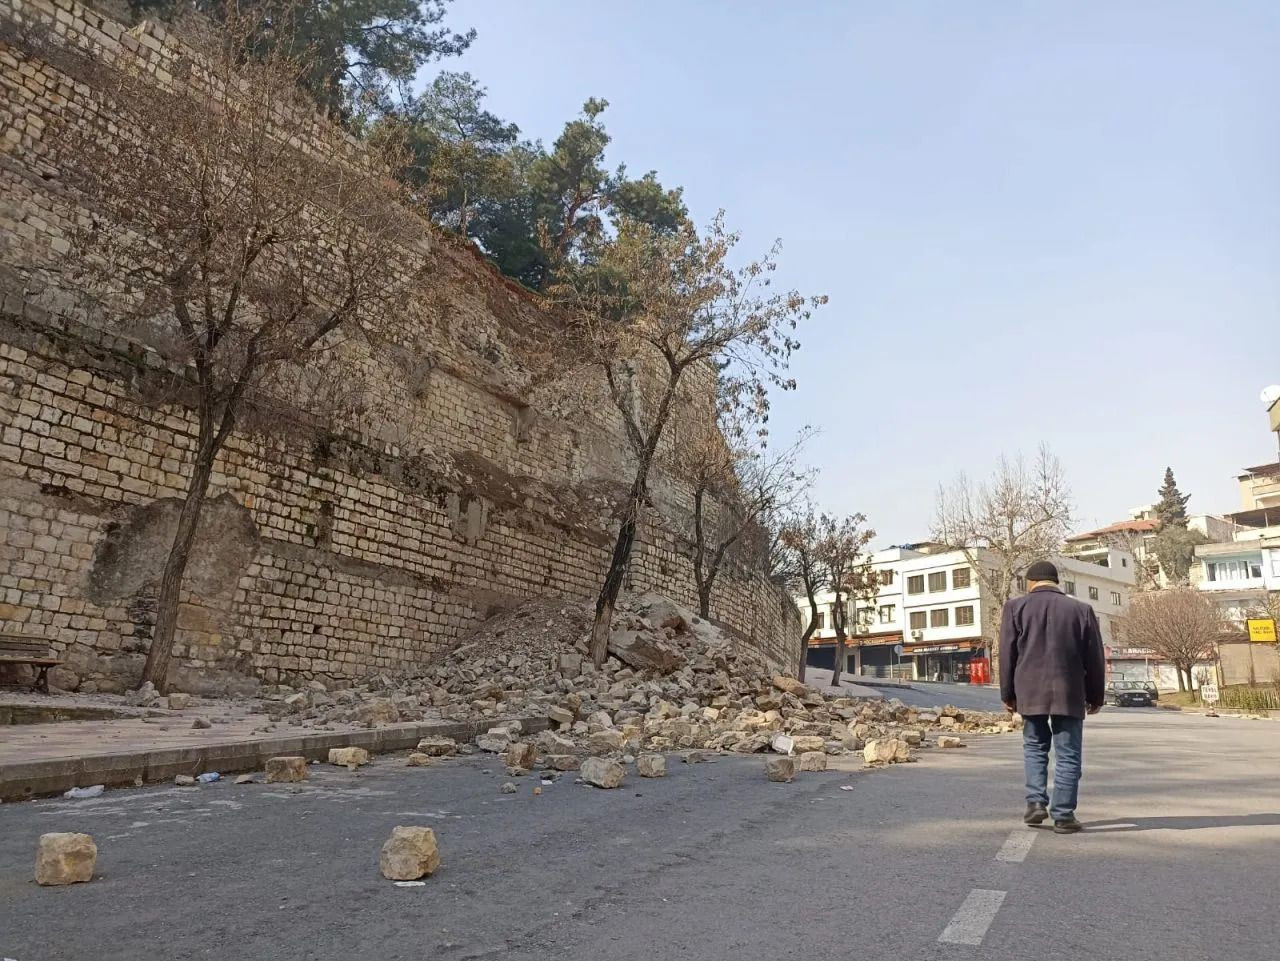 Satellite images help academicians map damage to archaeological sites in earthquake zone - Page 4